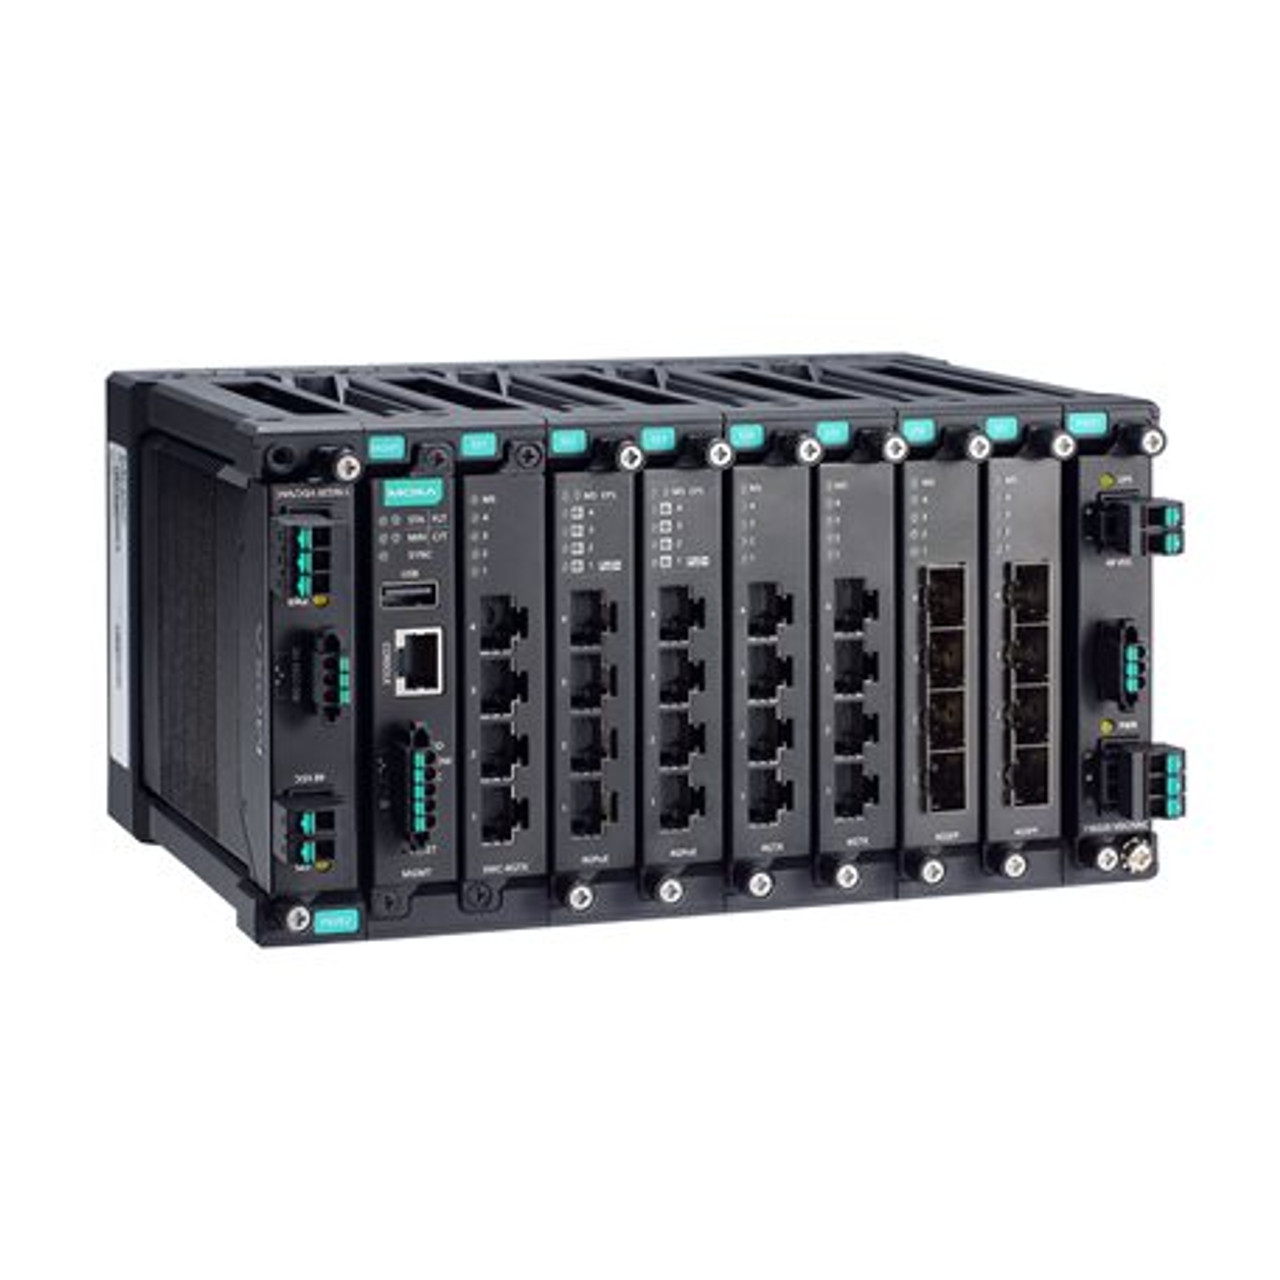 MDS-G4000 Series MDS-G4000-L3 Gigabit Module Managed Ethernet Switches